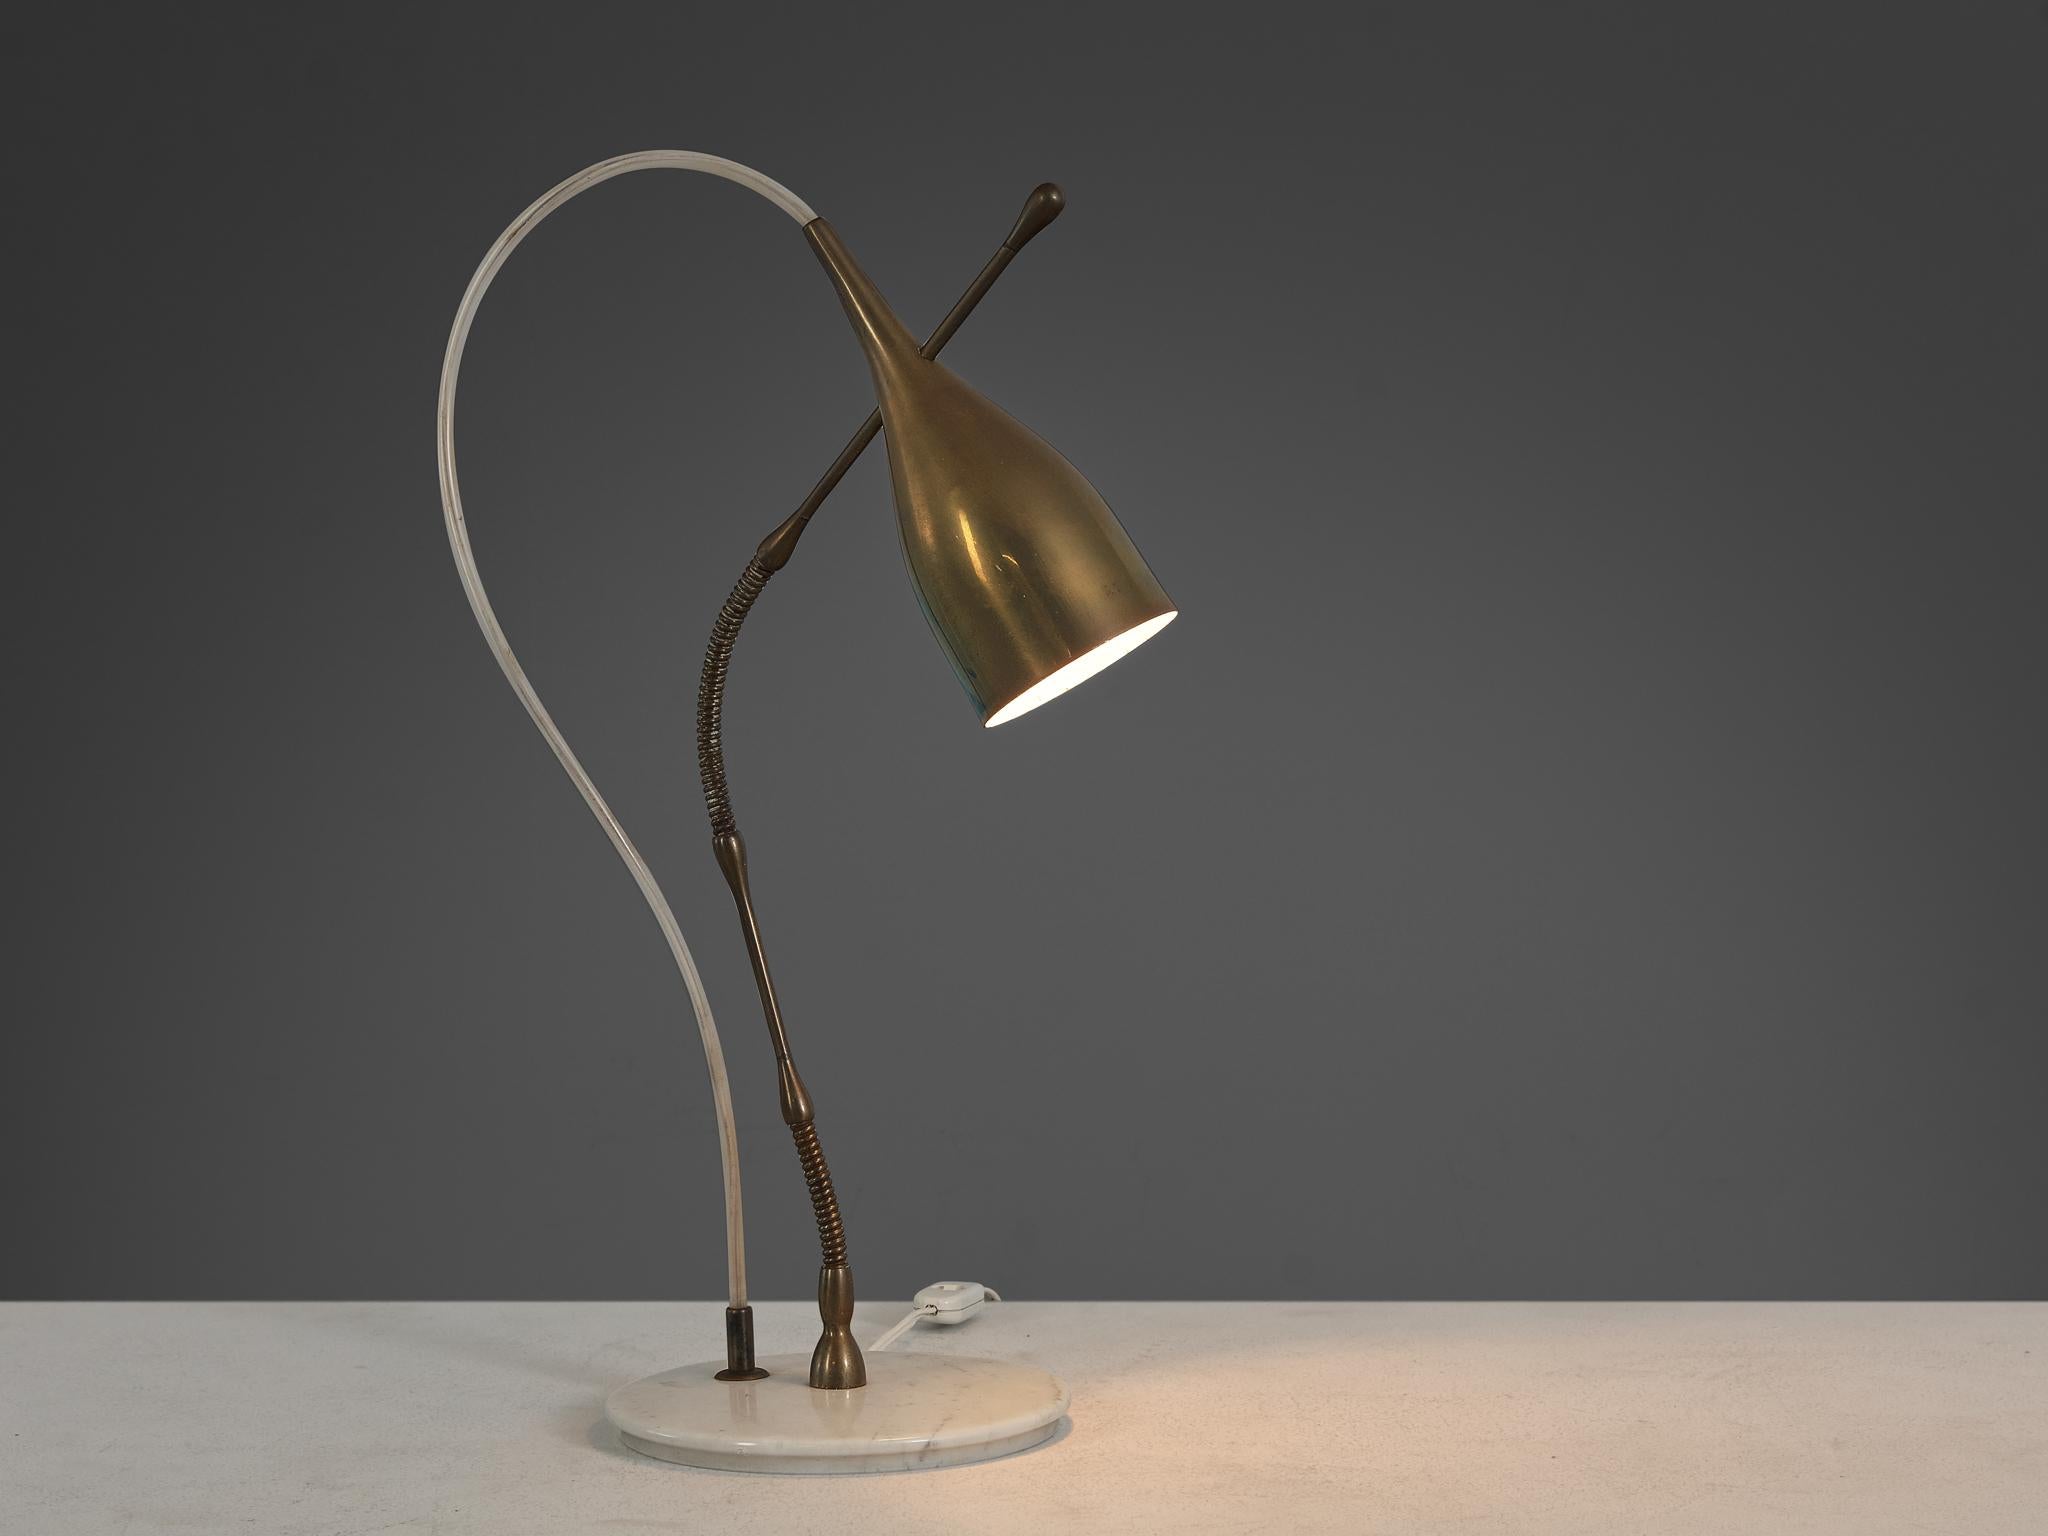 Angelo Lelii for Arredoluce, ‘Lucinella’ table lamp, model ‘12353’, brass, Carrara marble, rubber, Italy, circa 1950

This exquisite table lamp is designed by Angelo Lelii for Arredoluce in Italy around 1950. Lelii's designs were widely acclaimed